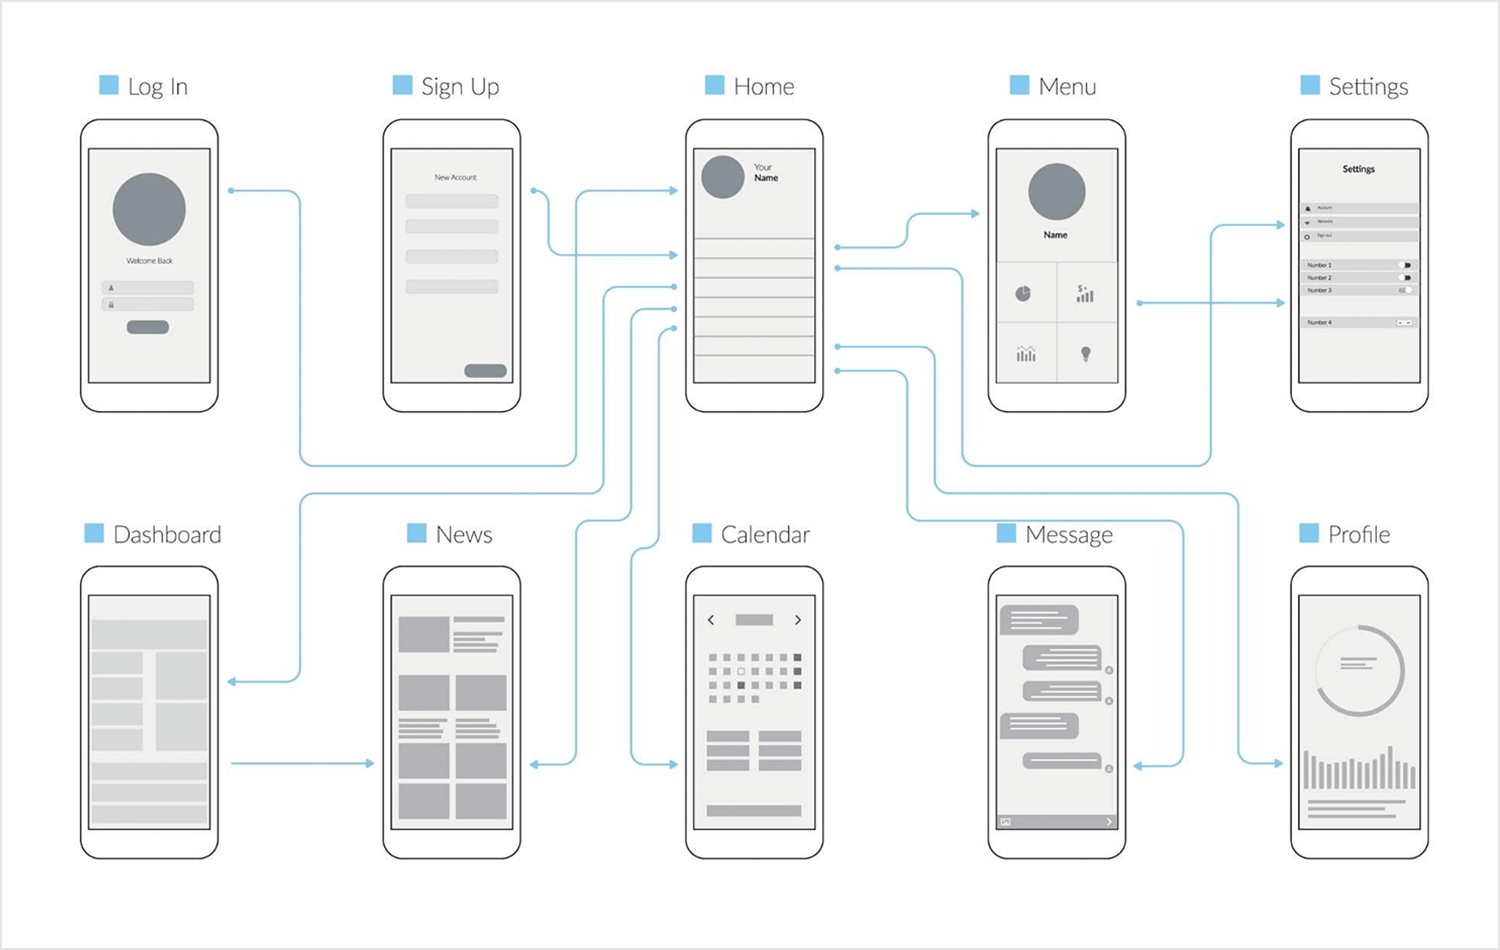 Mobile app user flow diagram showing login, sign up, home, menu, settings, and other screens